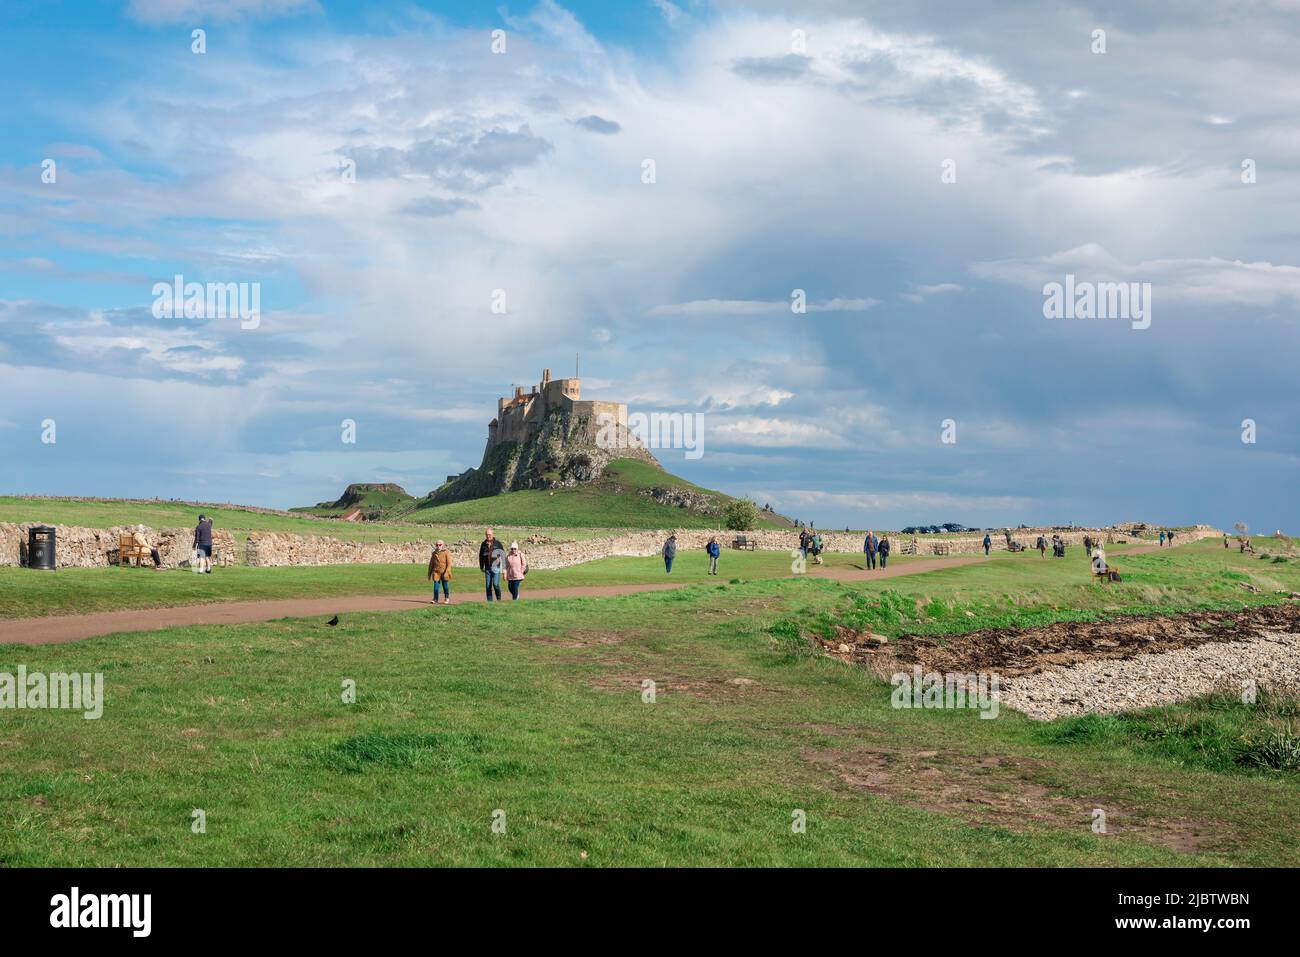 Holy Island Castle, view of the 16th century castle sited on Holy Island (Lindisfarne) with people walking near the foreshore, Northumberland, UK Stock Photo